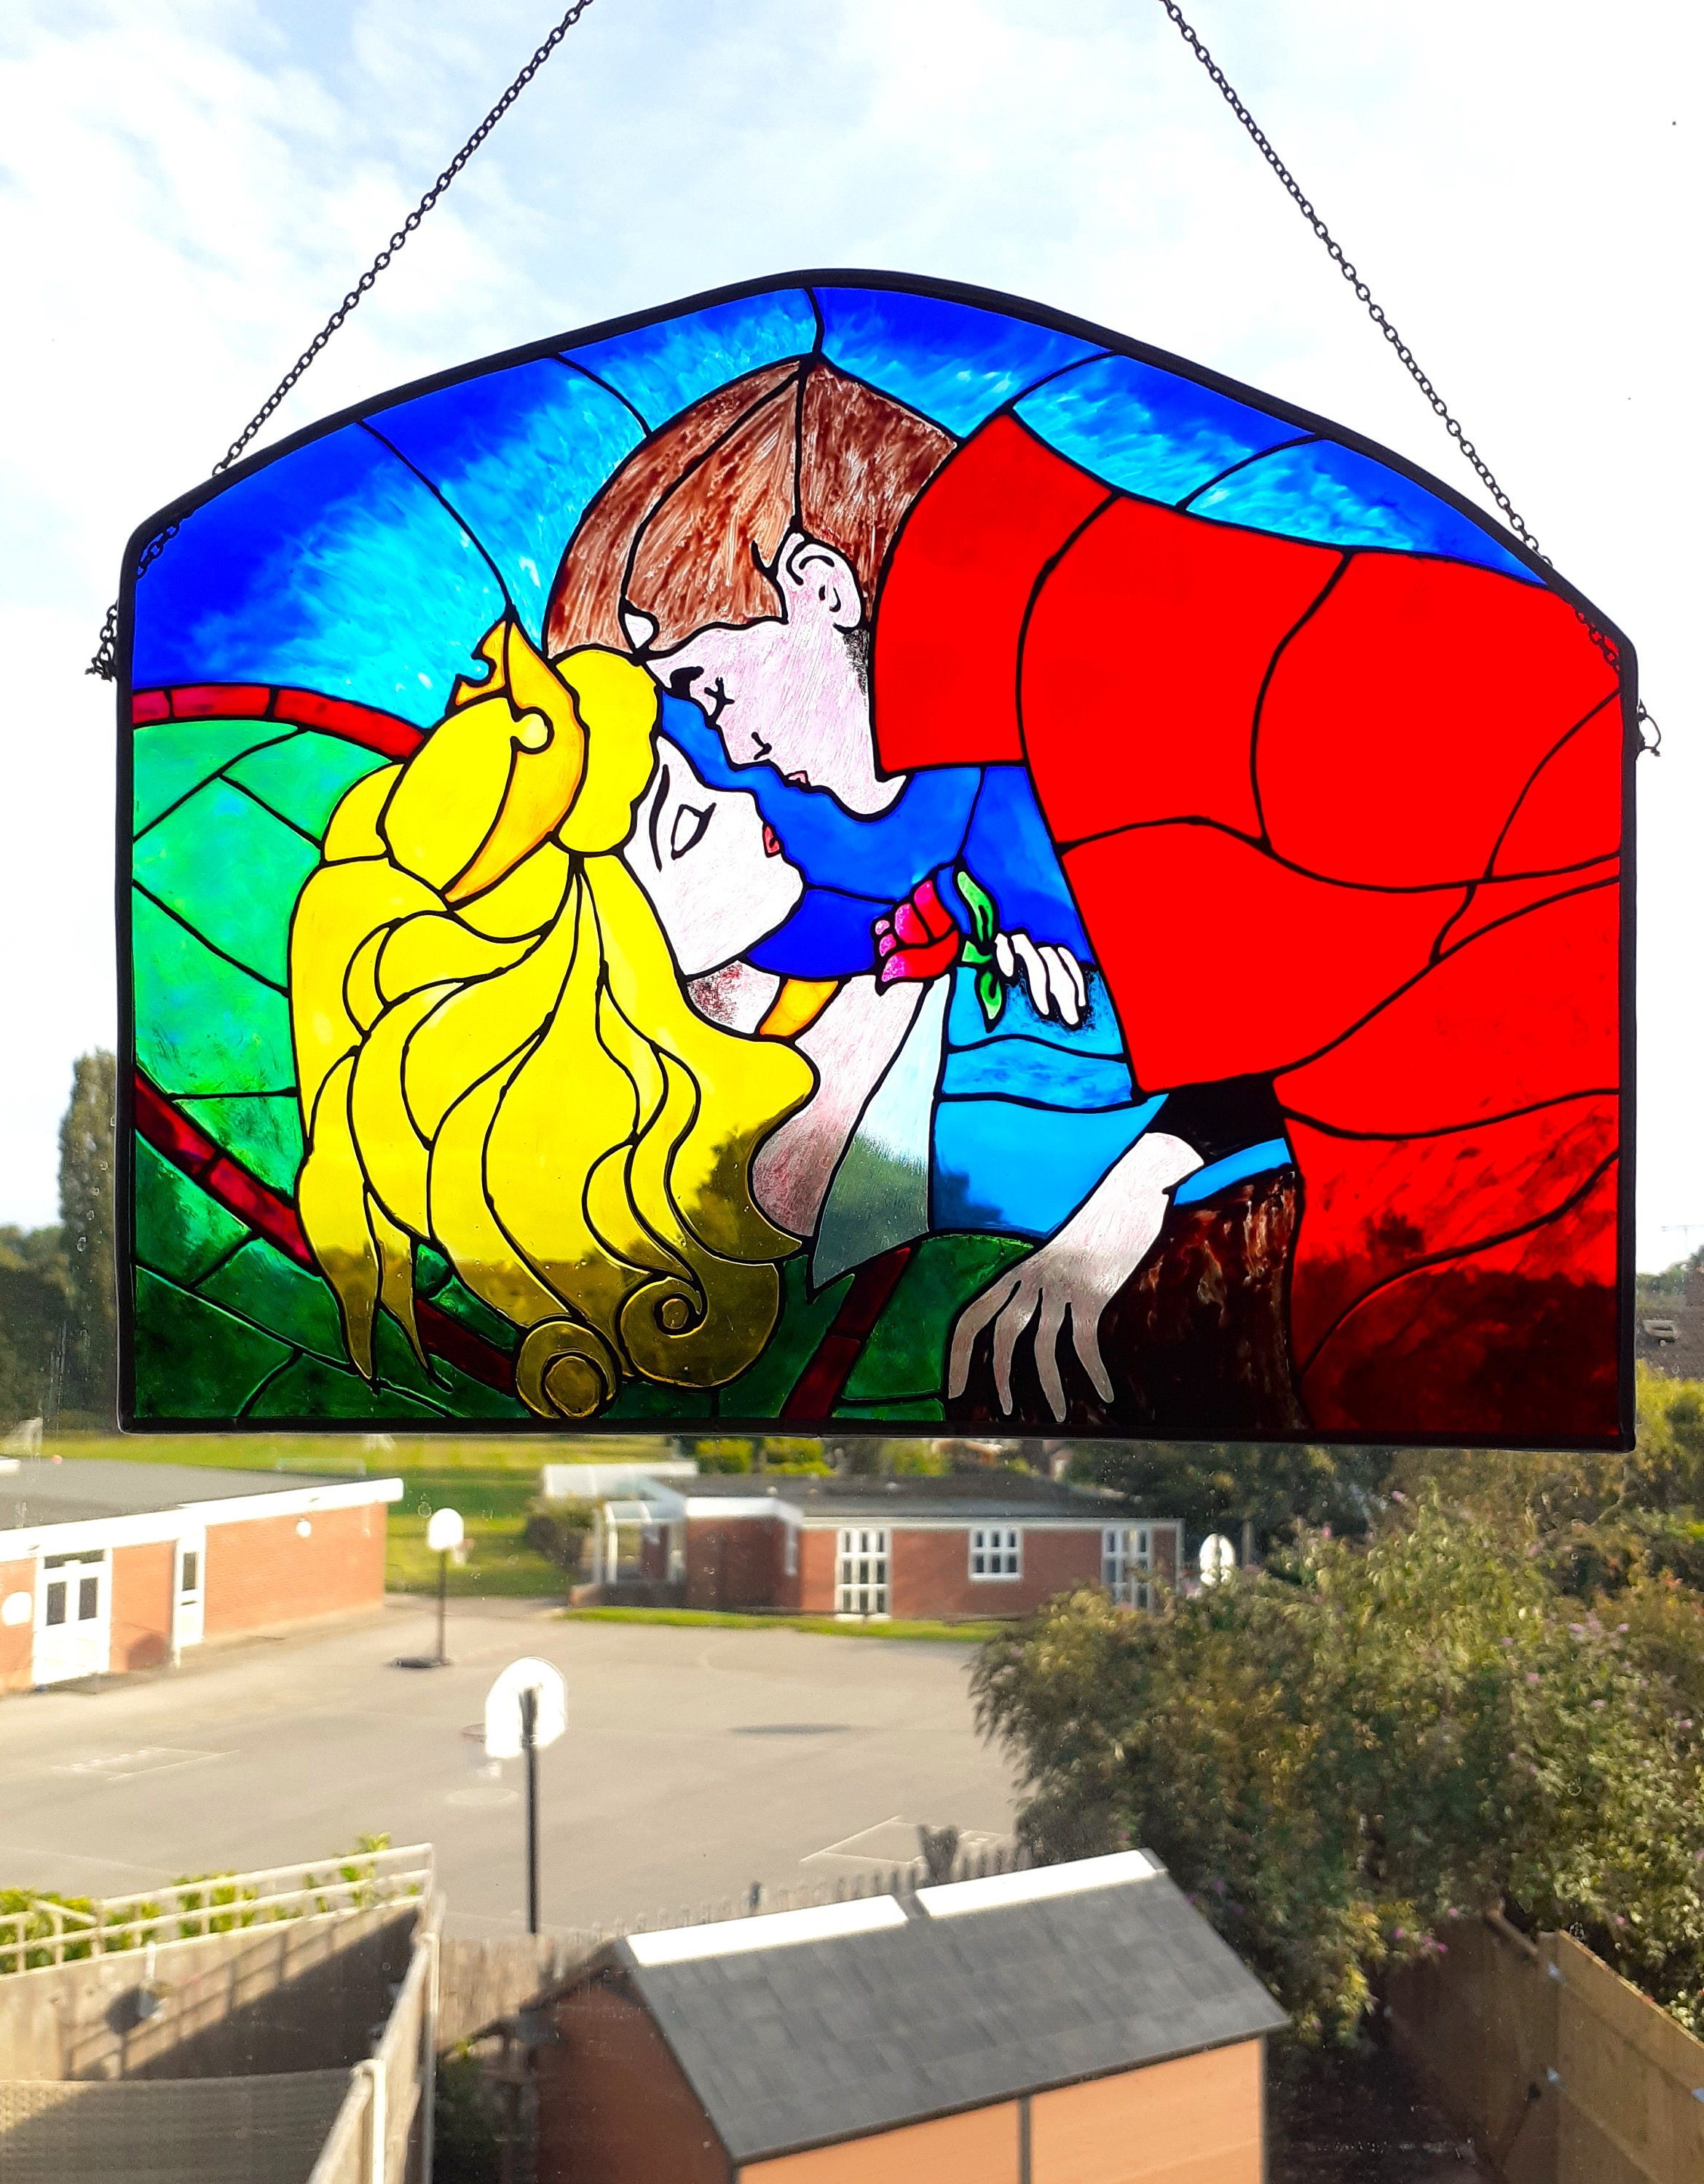 Disney Inspired Princess Sleeping Beauty Kiss Stained Glass 